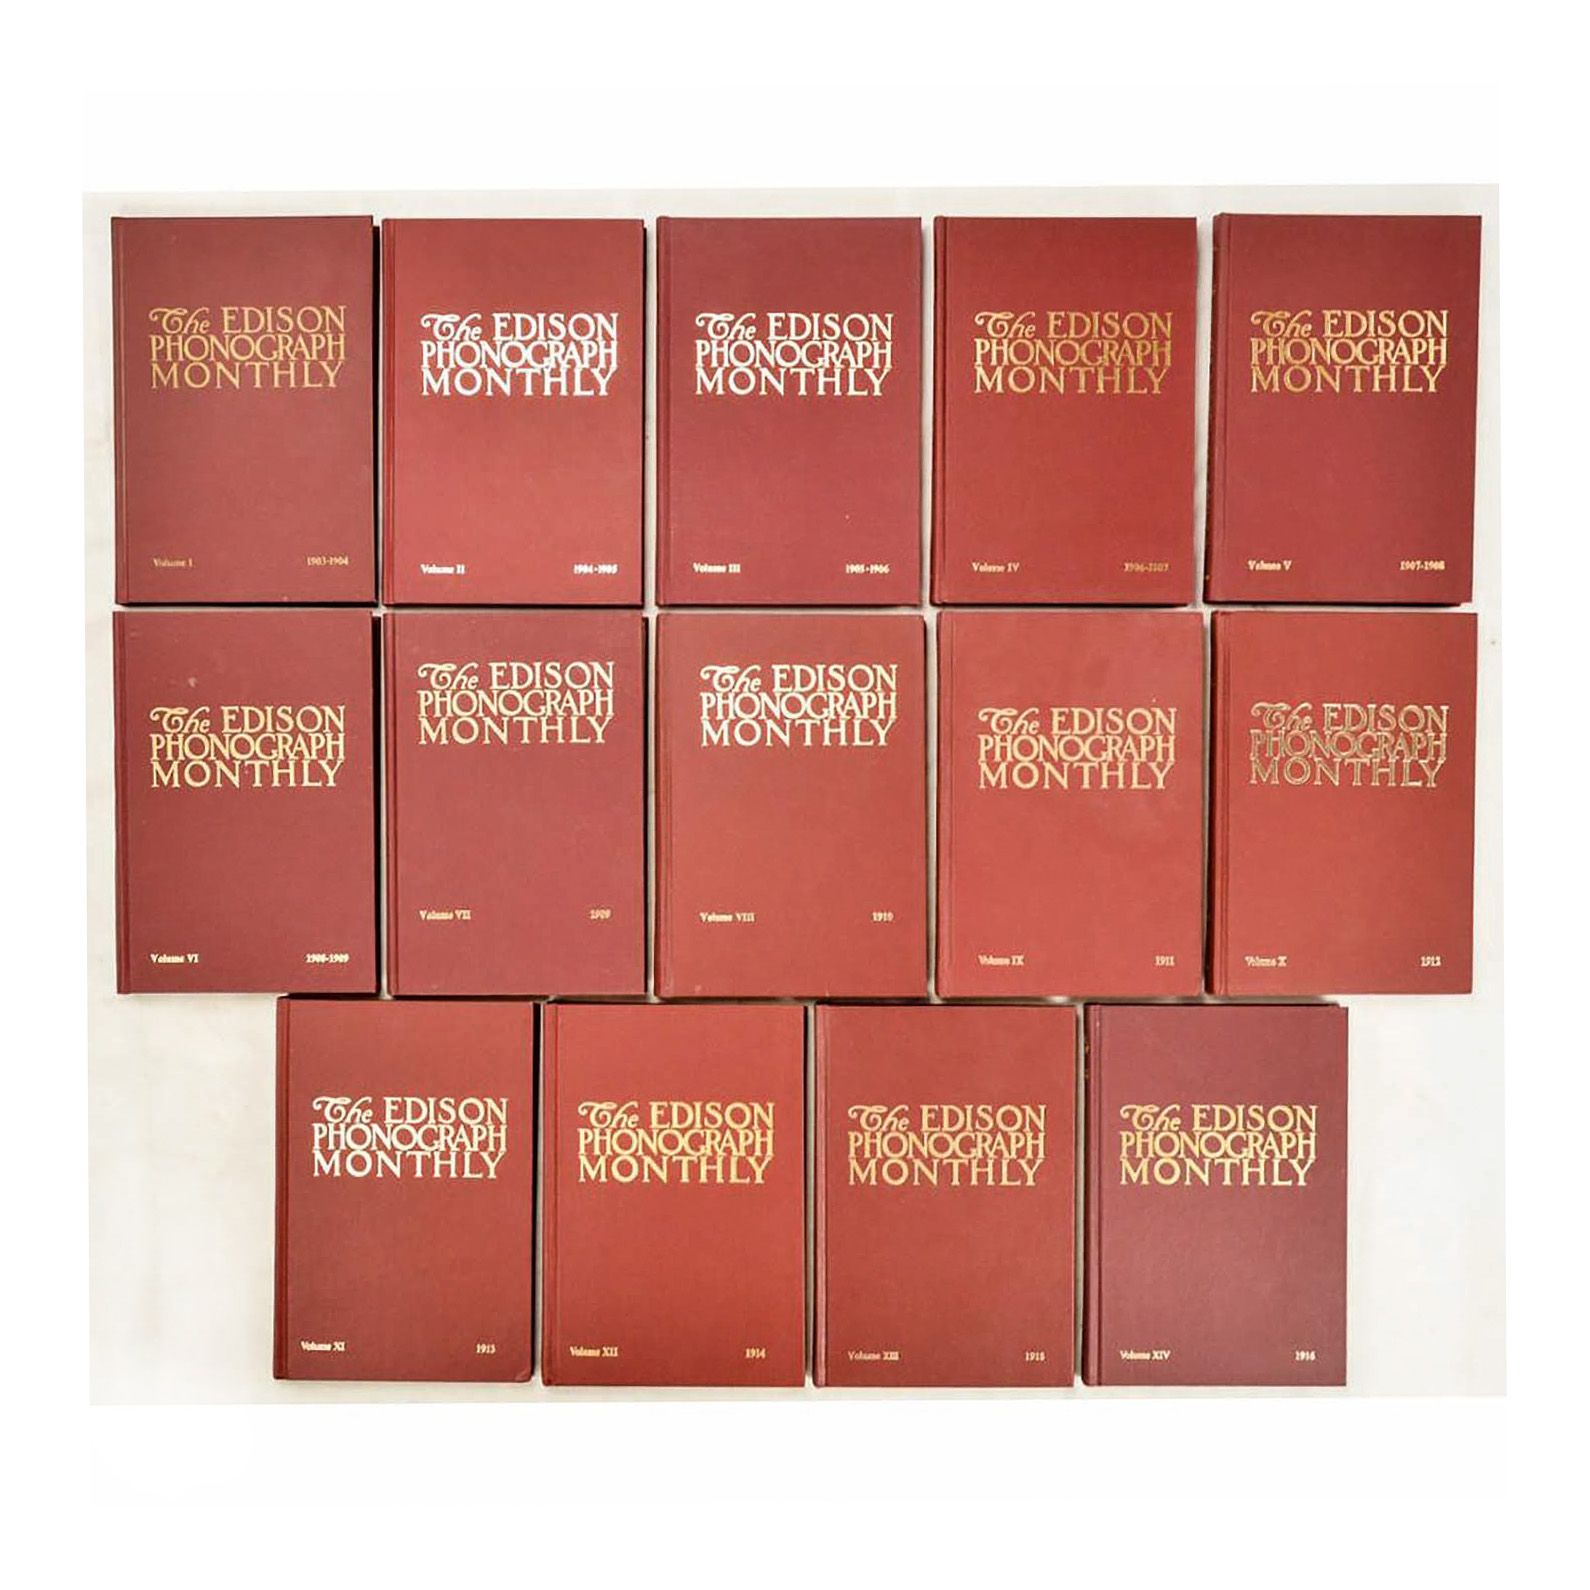 Reproduction 14 Volume Set of Edison Phonograph Monthly 拍品包含14卷，其中包含了温德尔-摩尔1903年&hellip;